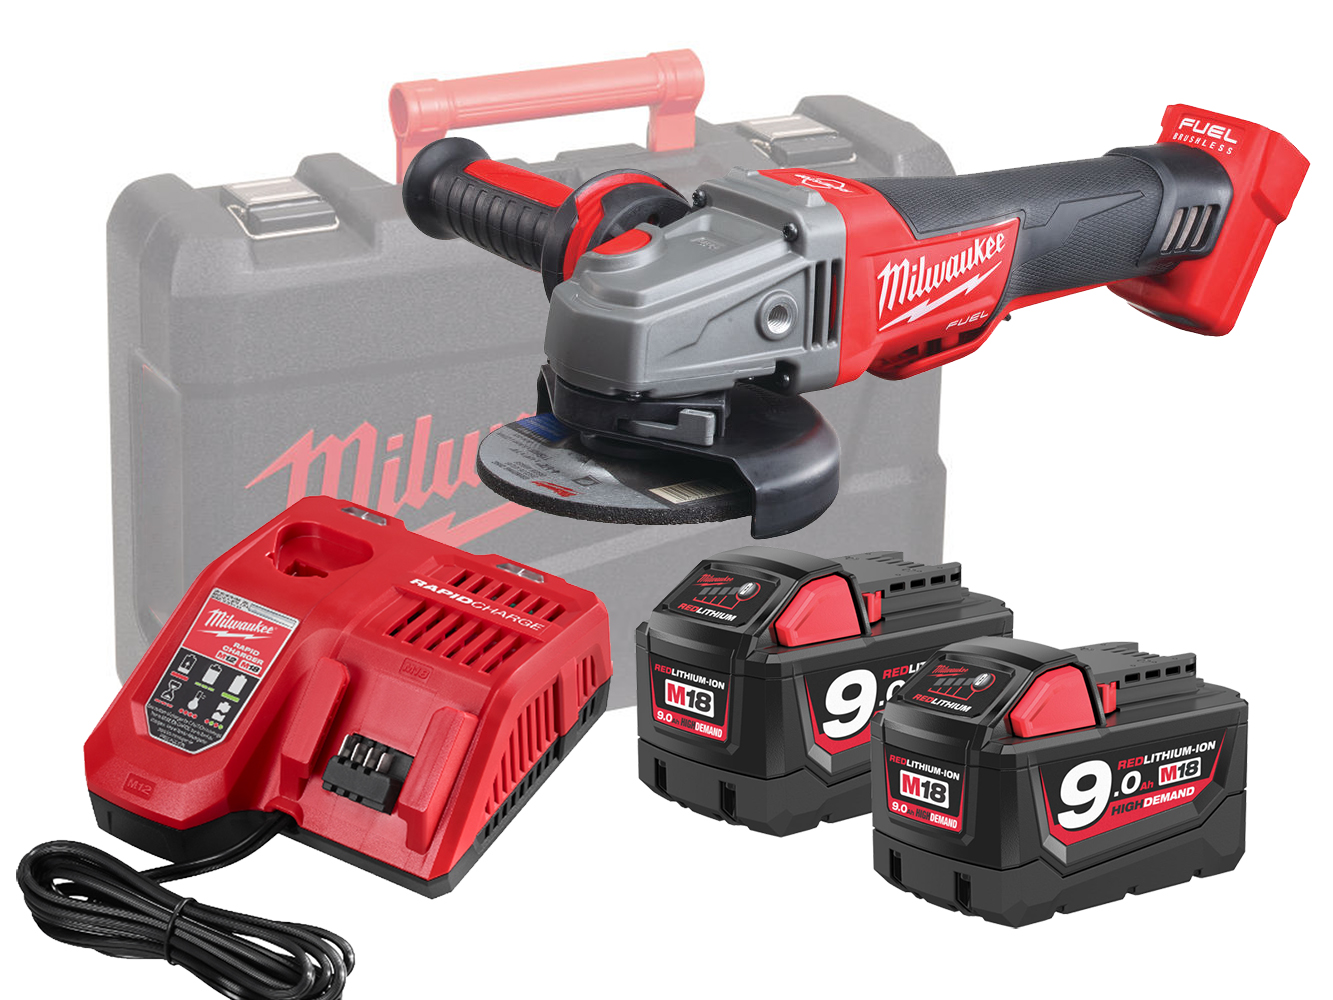 Milwaukee M18CAG115XPDB 18V Fuel 115mm Breaking Grinder With Paddle Switch - 9.0Ah Pack